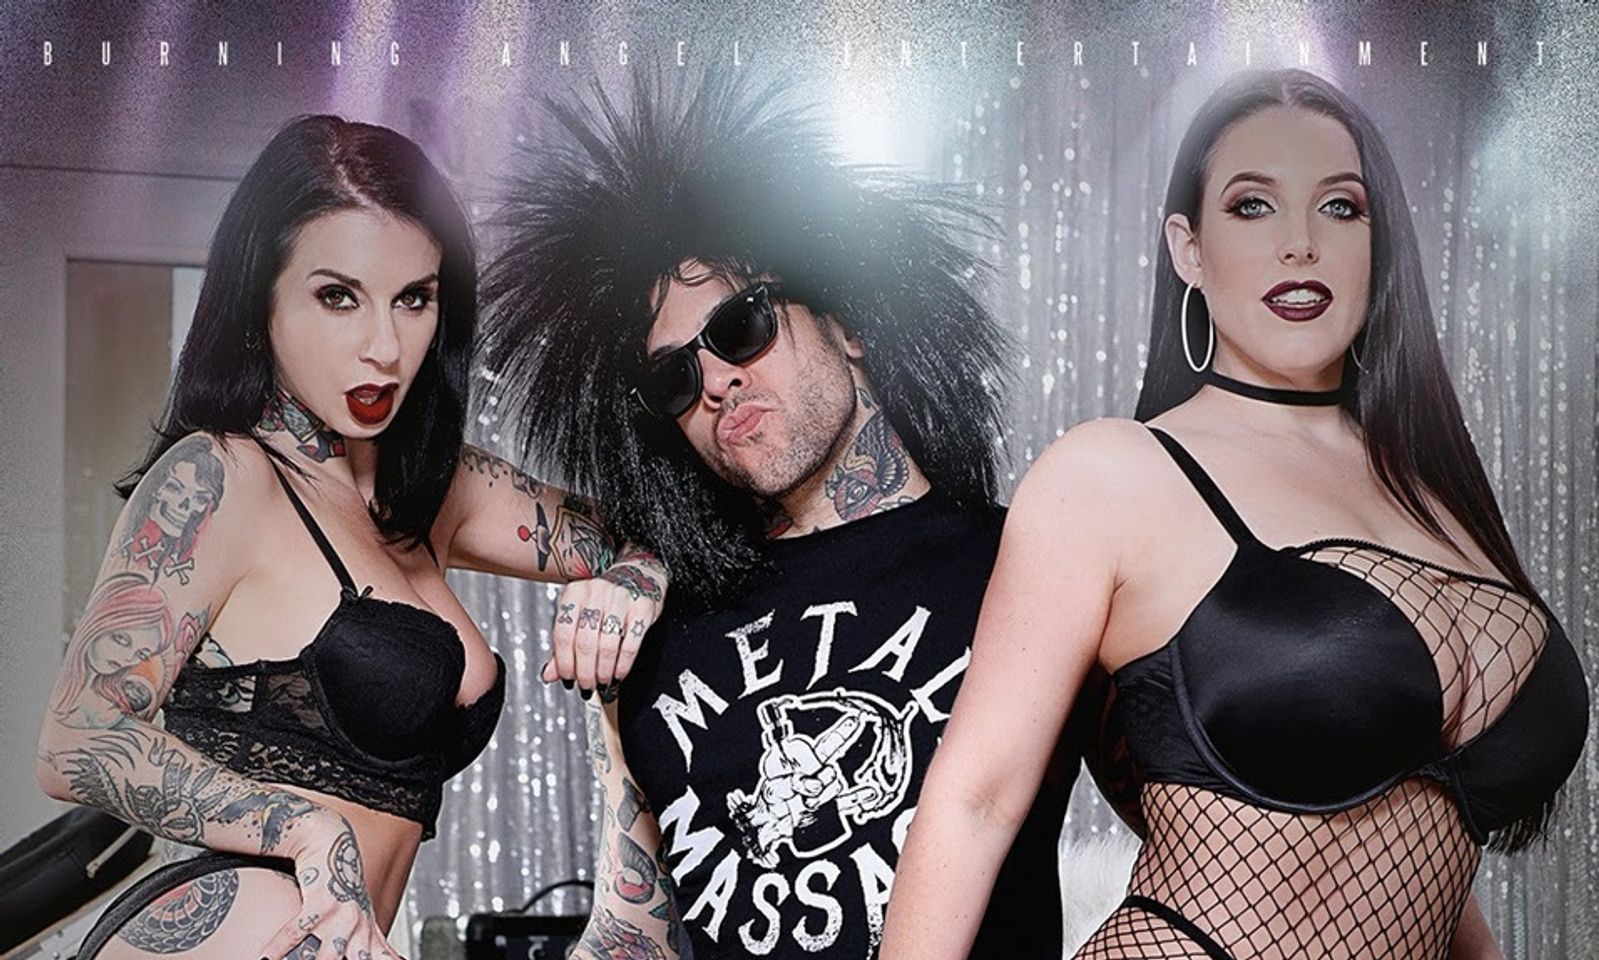 BurningAngel Offers Rock n' Roll Relaxation With 'Metal Massage'